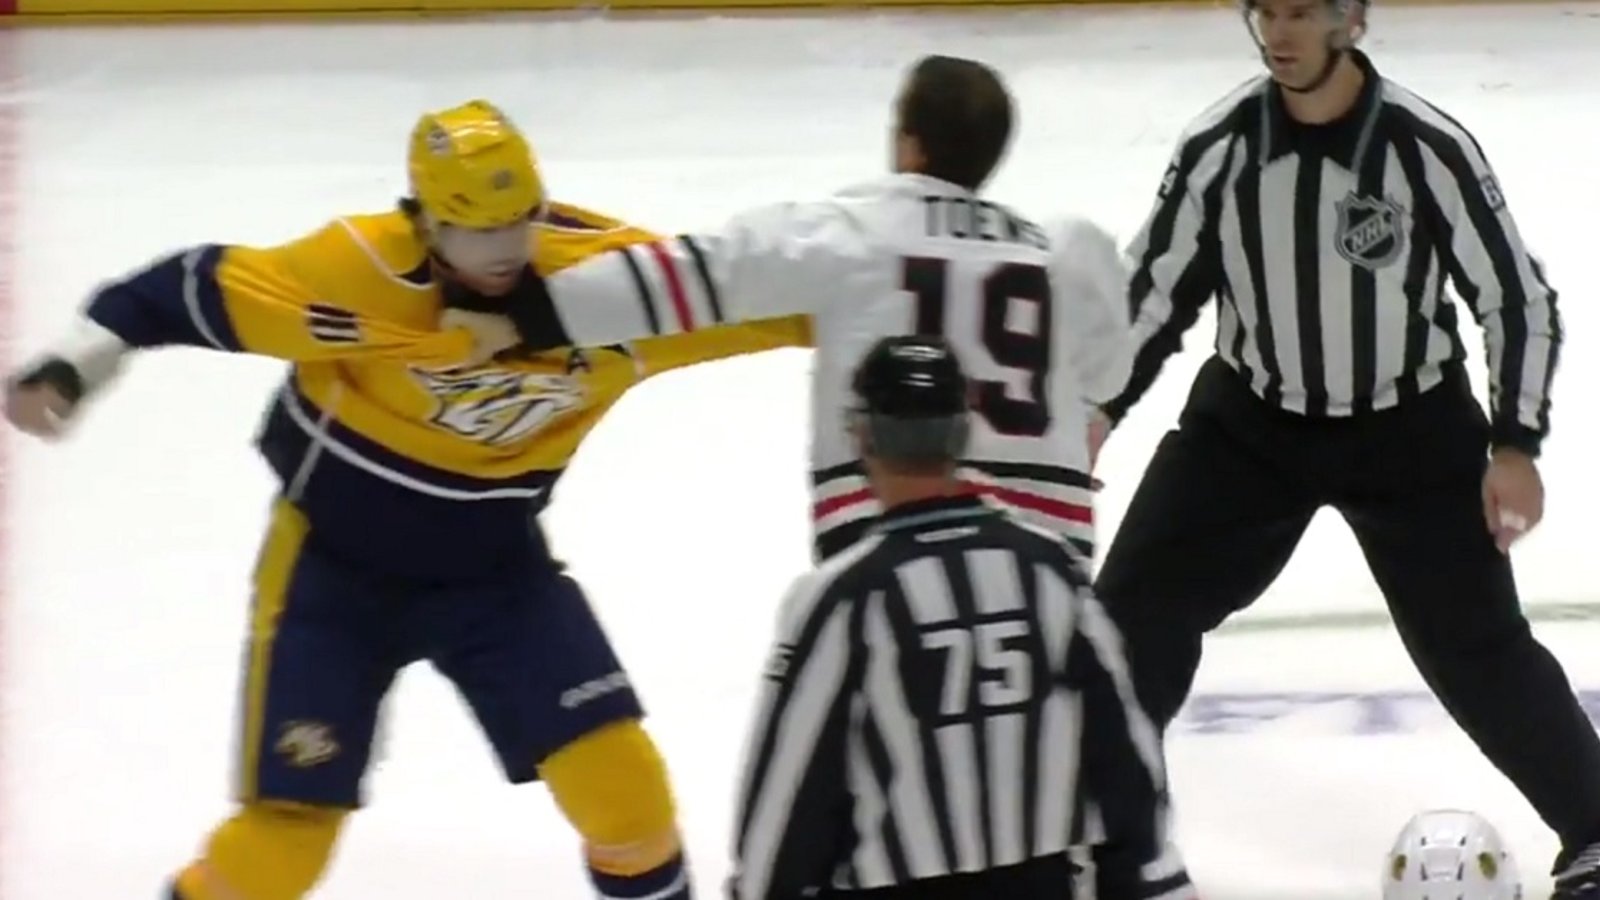 Breaking: Watch Jonathan Toews drop the gloves on Friday night!